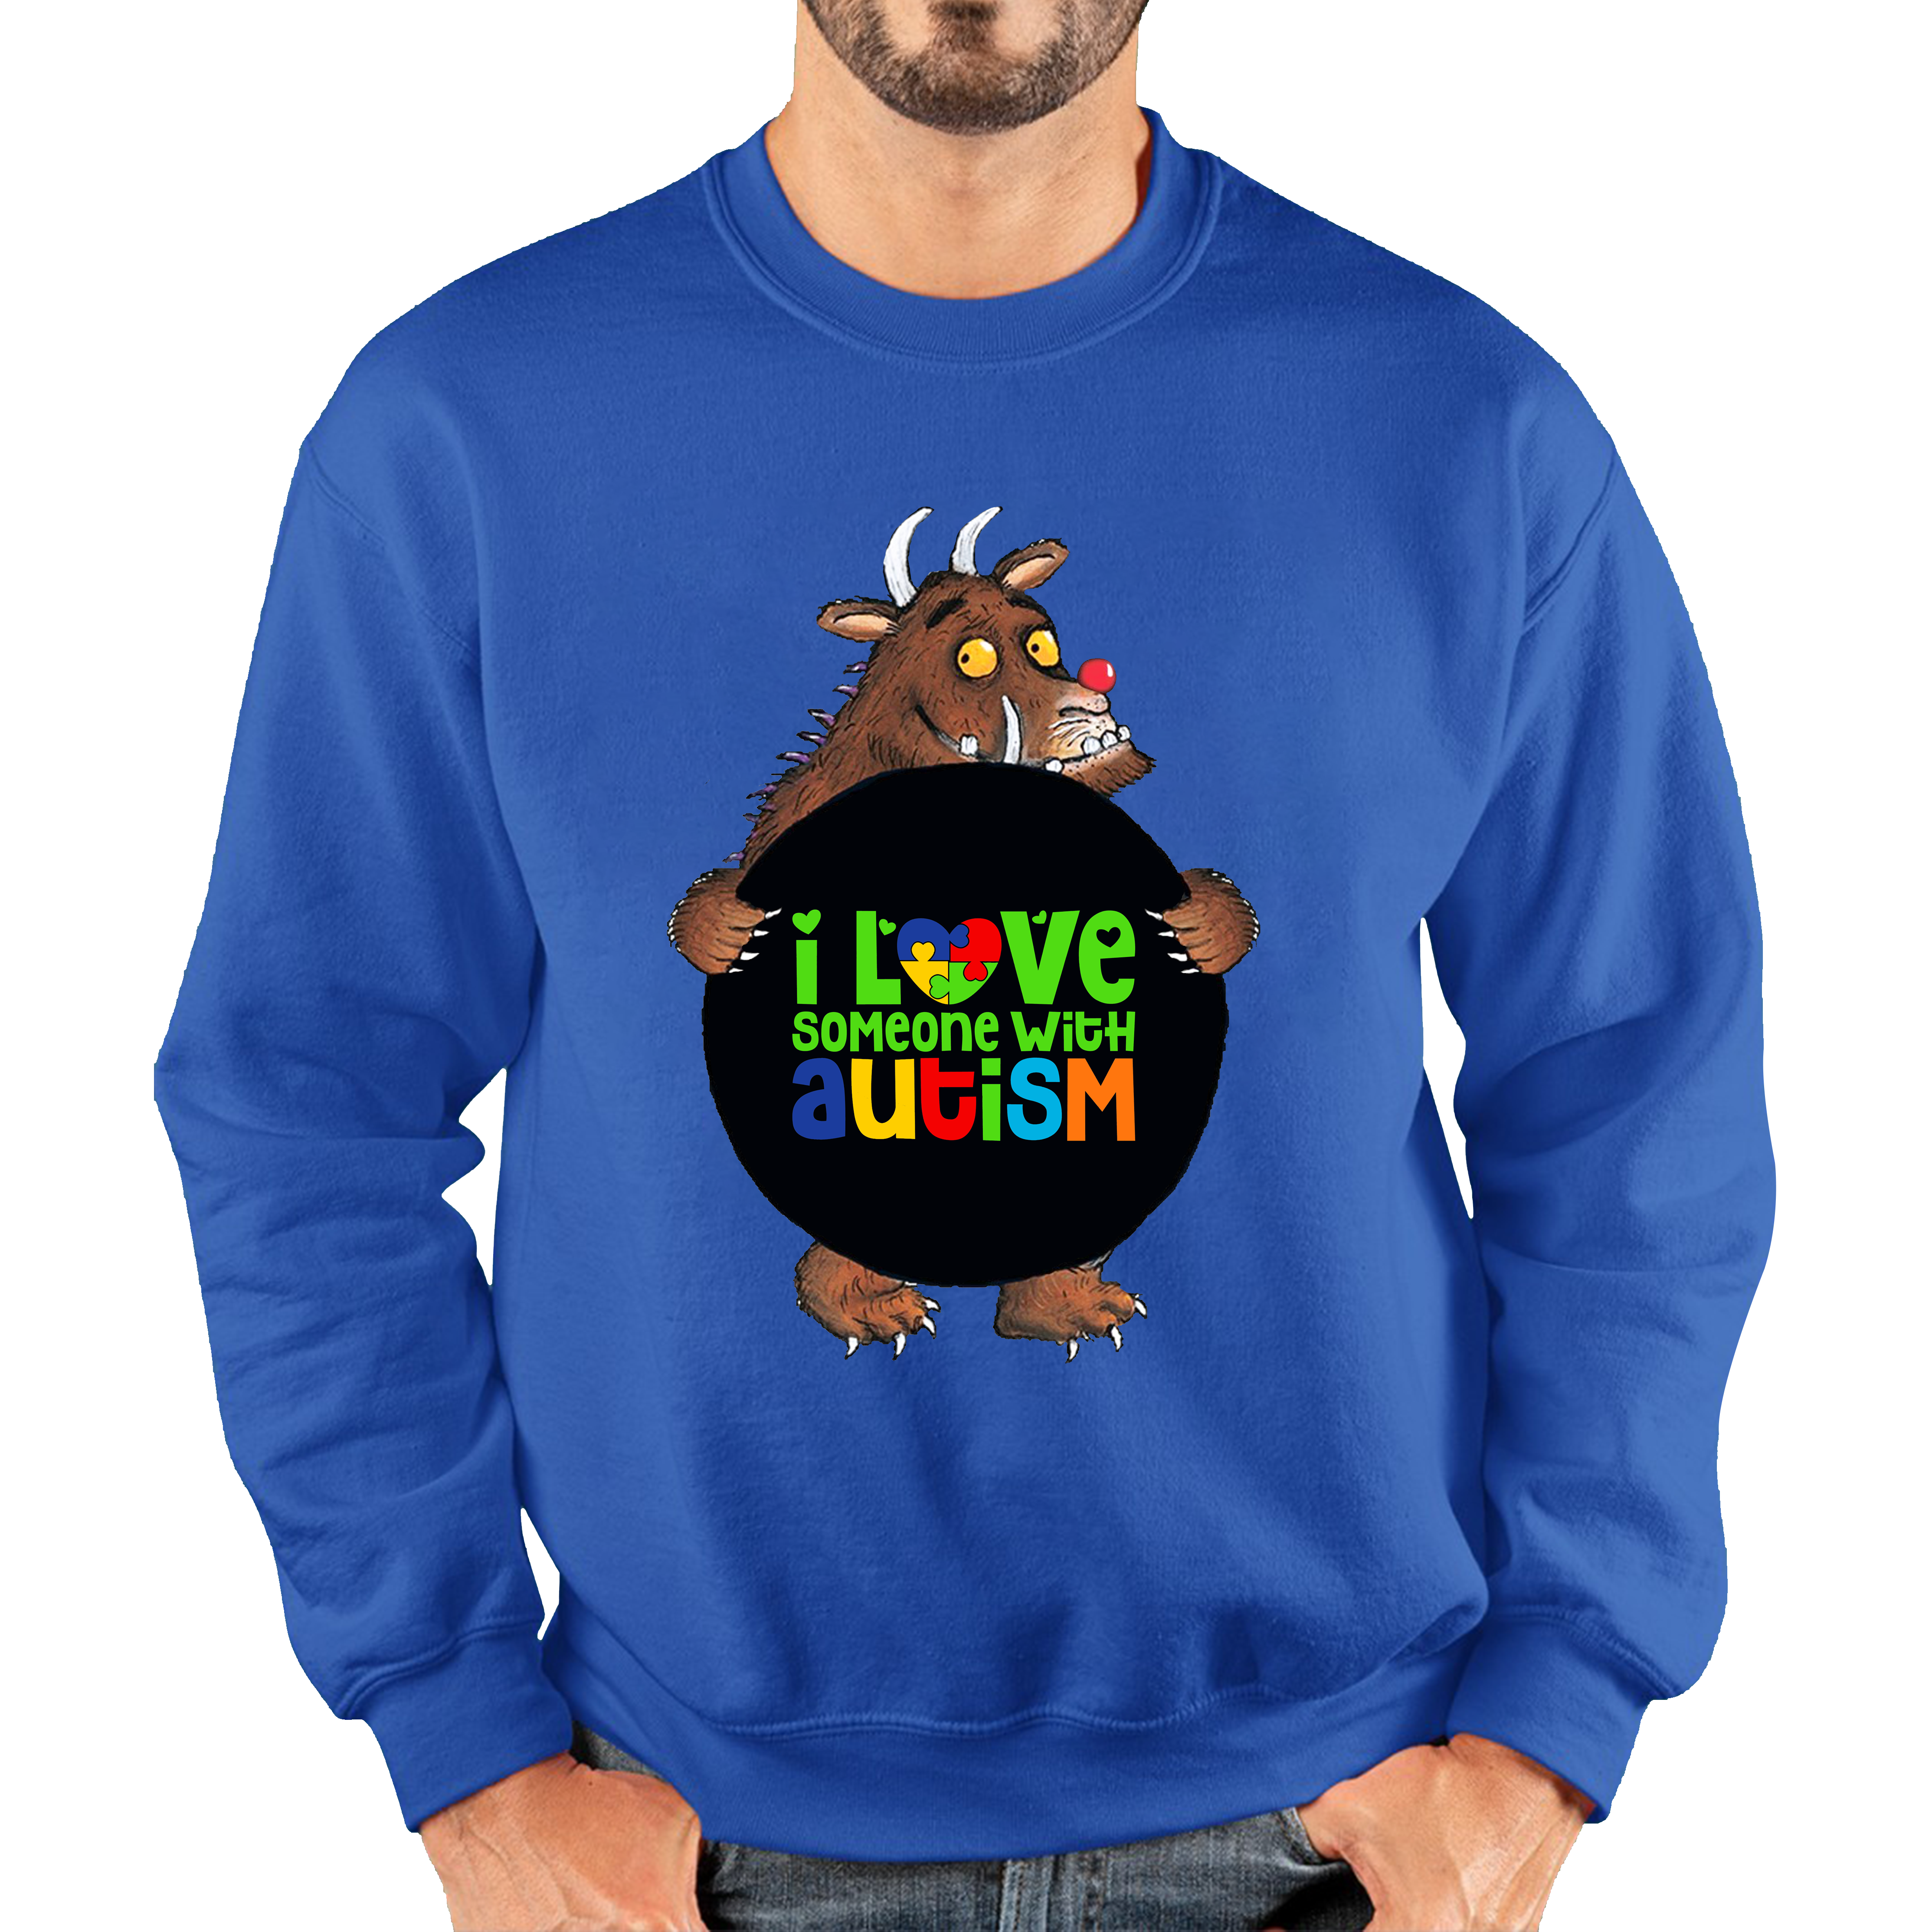 I Love Someone With Autism The Gruffalo Red Nose Day Adult Sweatshirt. 50% Goes To Charity